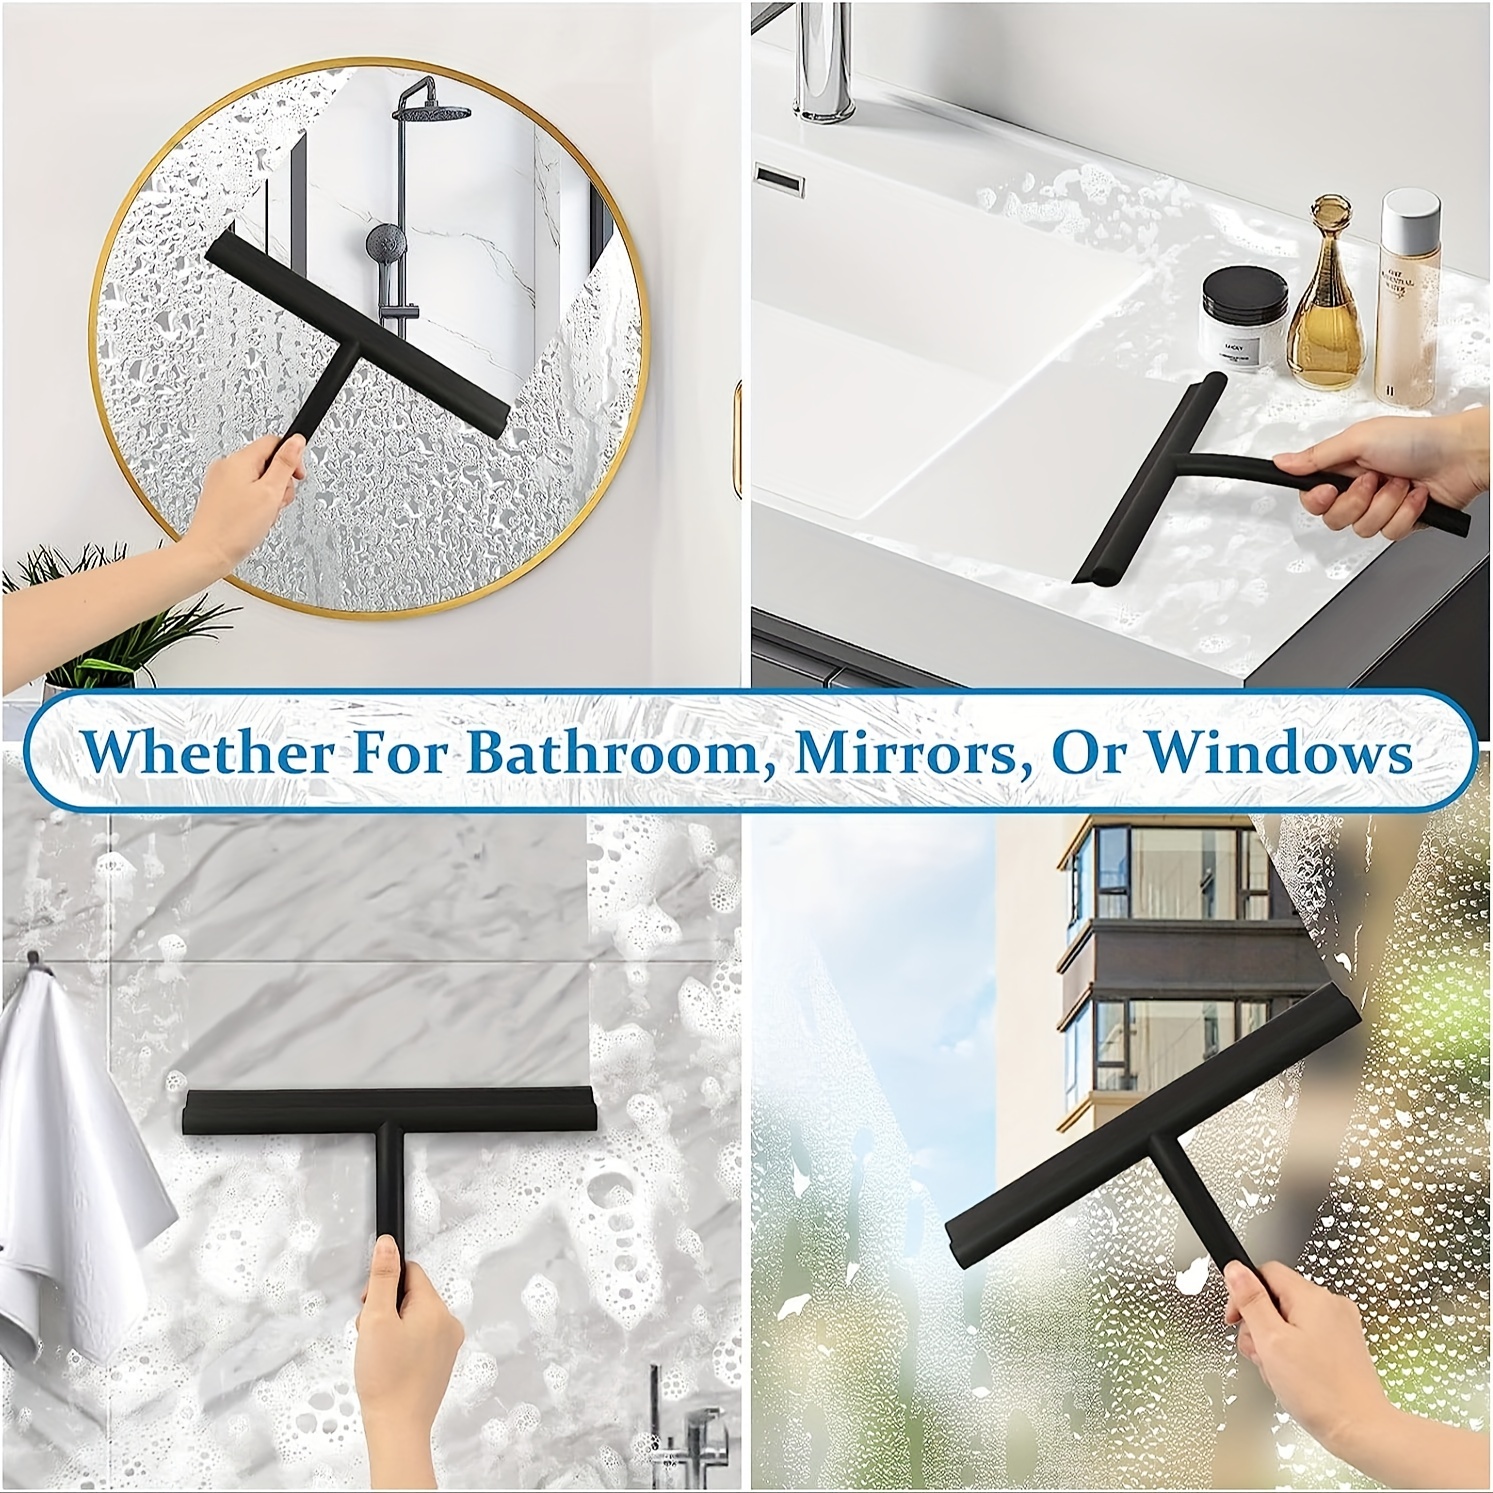 1pc Black Shower Squeegee, Bathroom Glass Squeegee, Shower Glass Cleaner,  Silicone Squeegee With Hook For Shower Doors, Mirrors, Tiles And Car Windows